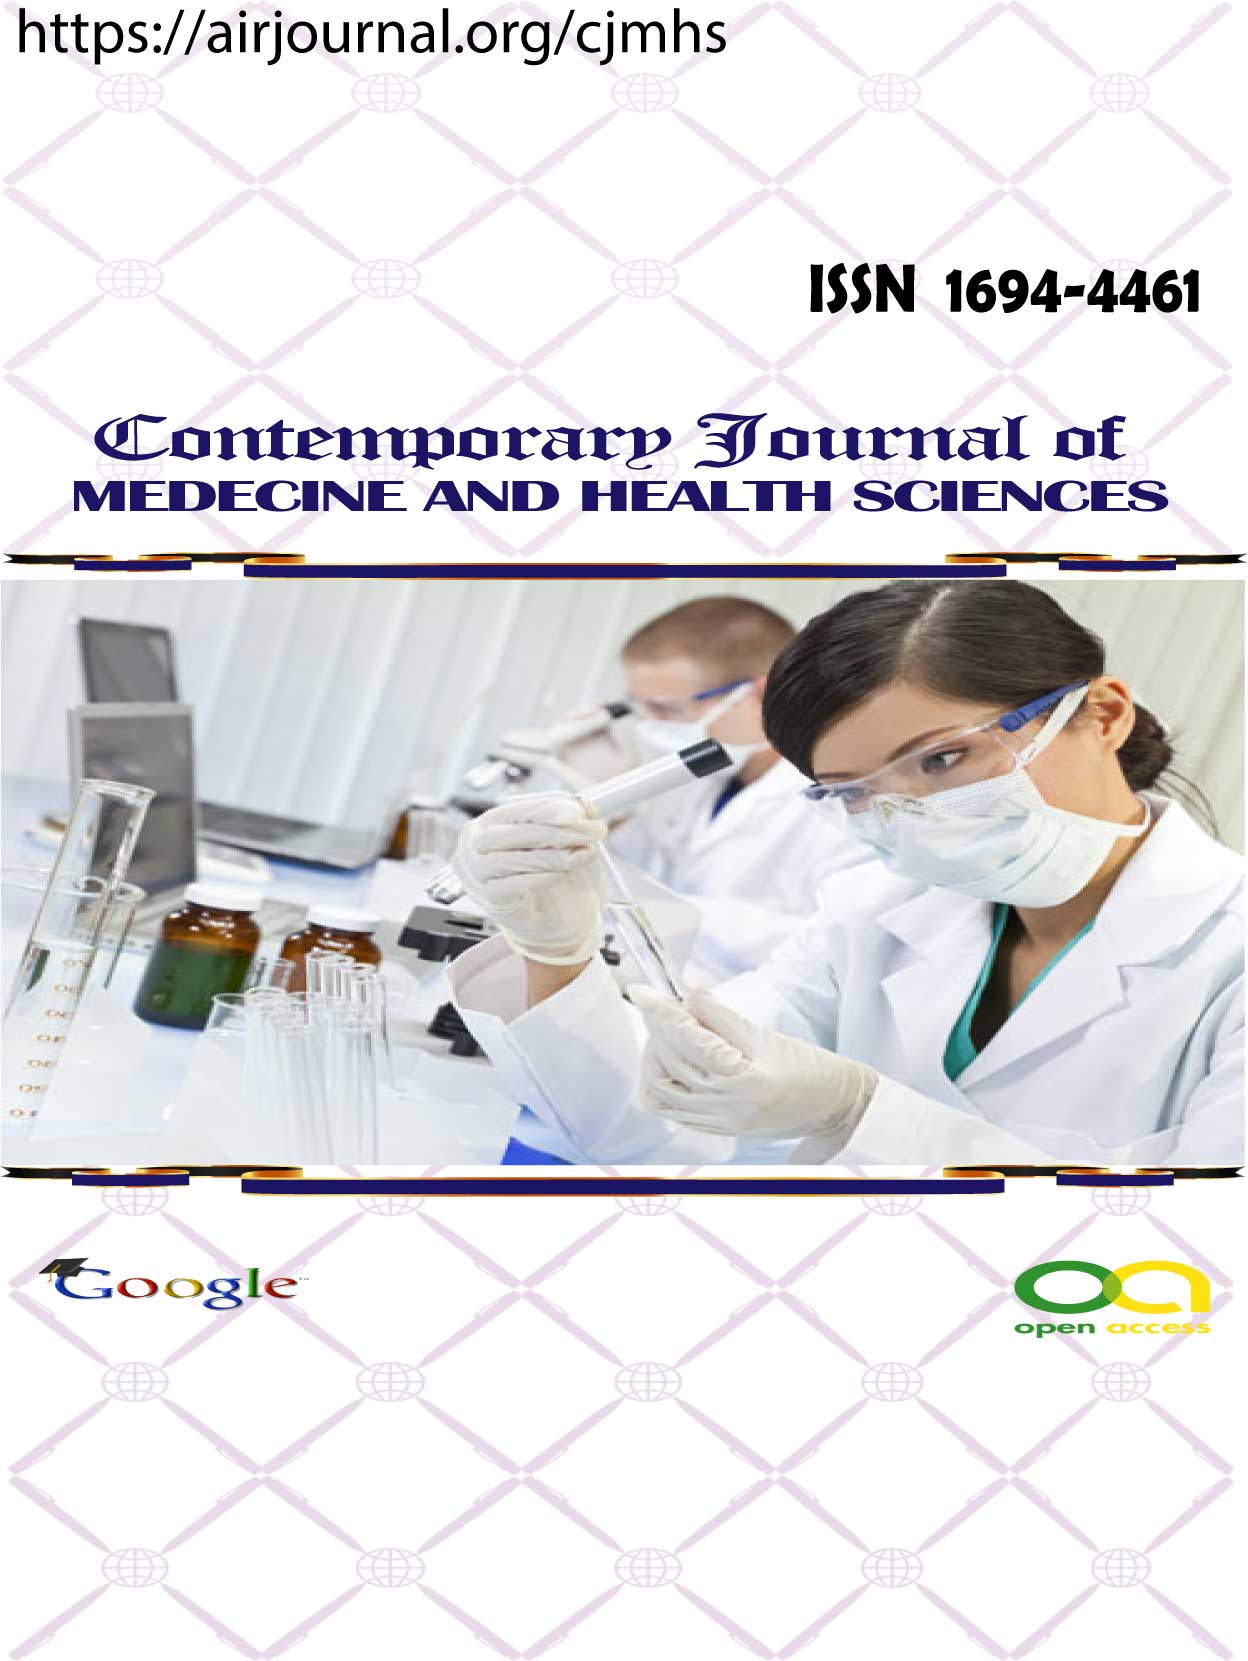 Contemporary Journal of Medicine and Health Sciences (CJMHS)